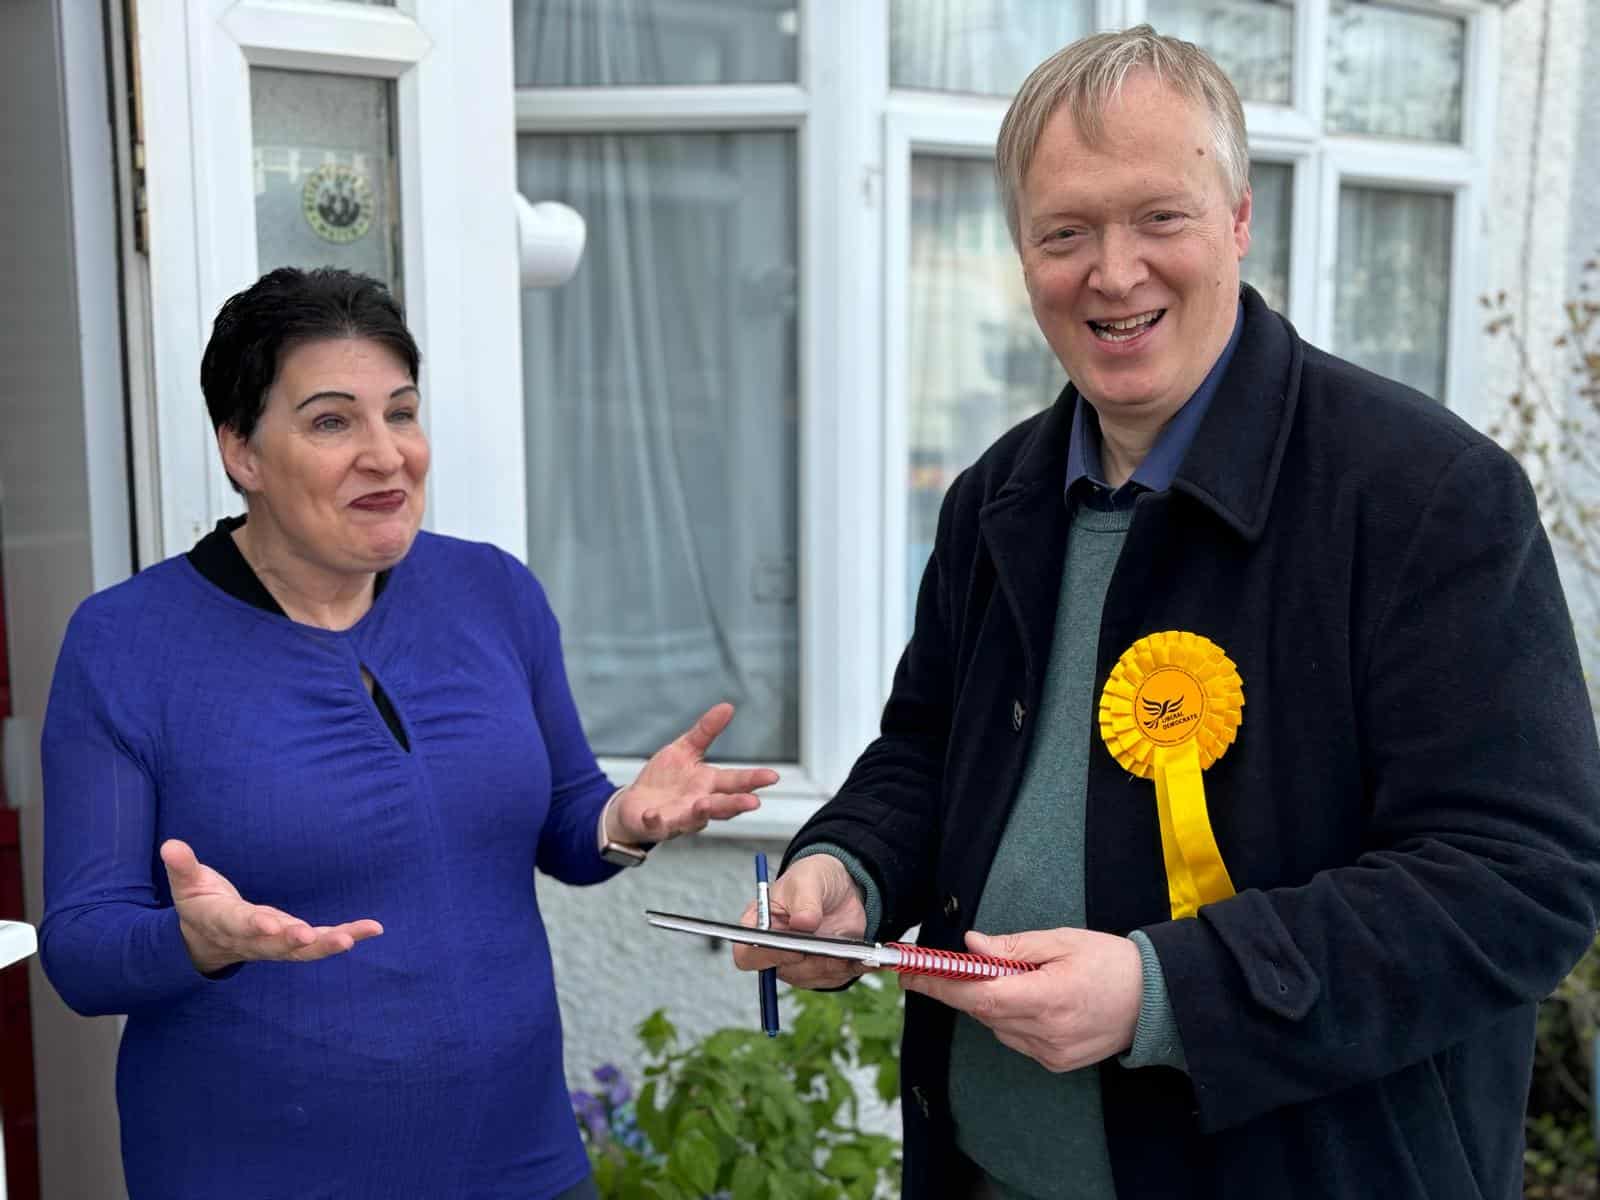 A woman gestures animatedly while talking to a smiling man with a yellow rosette, who holds a clipboard, outside a house.